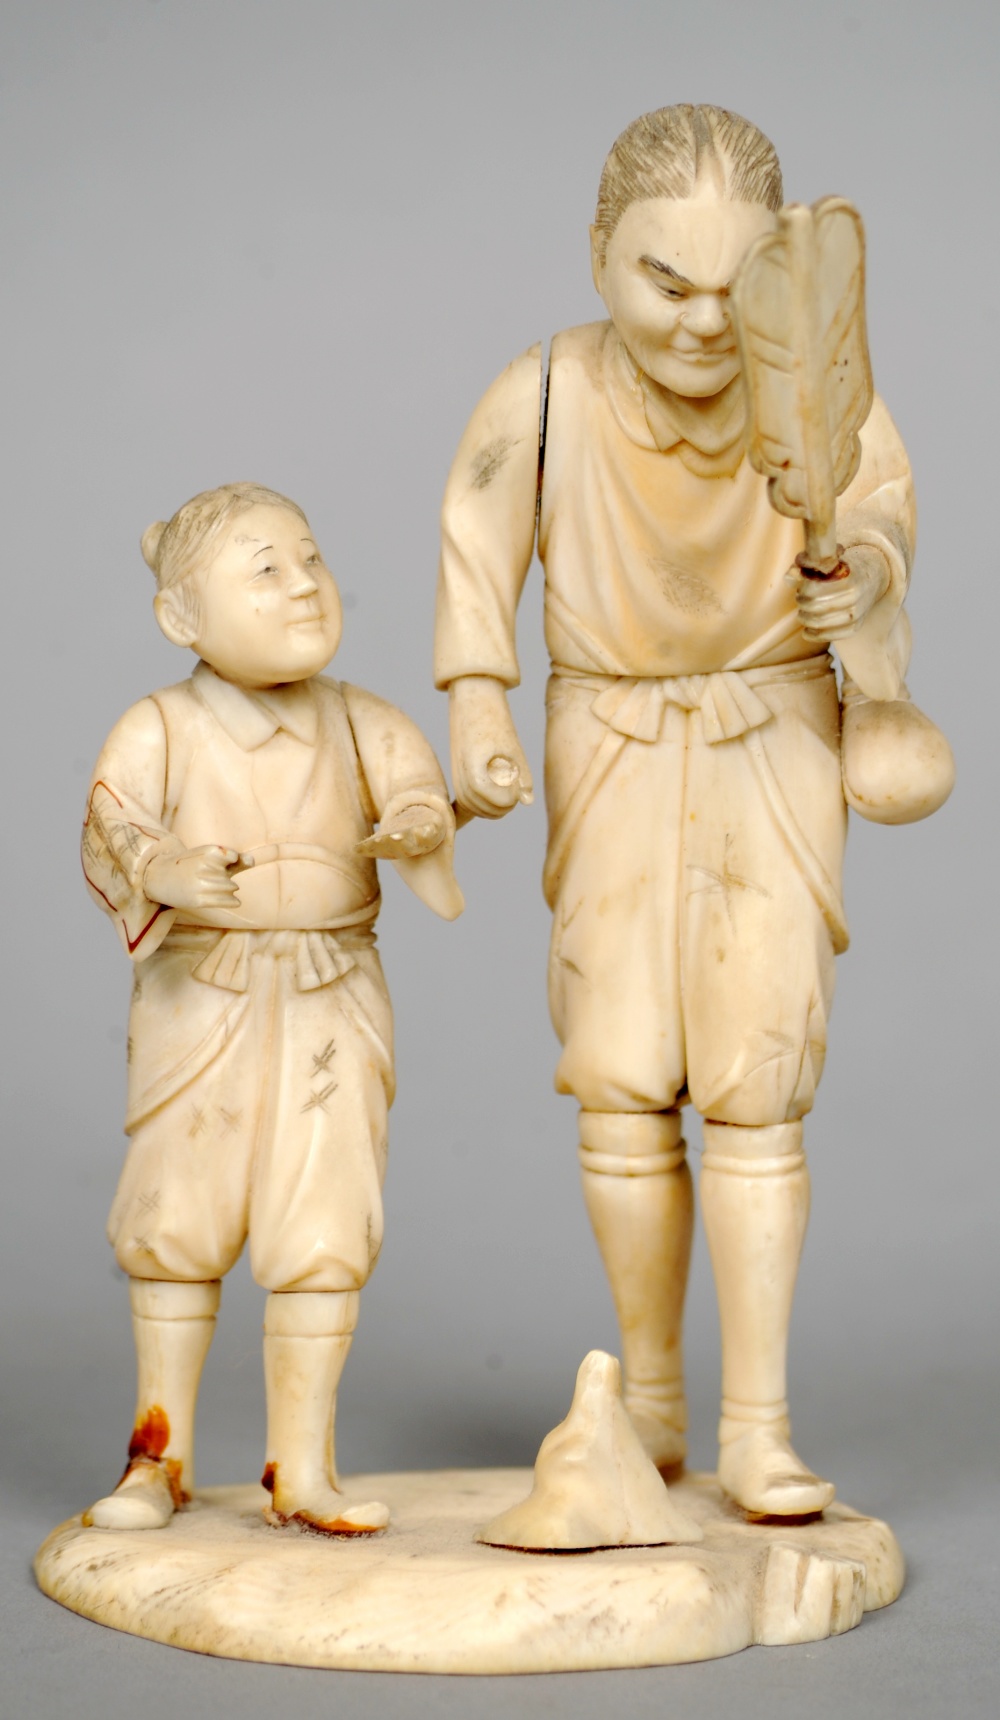 A 19th century Japanese ivory okimono
Formed as two figures, one holding a fan.  13.5 cms high.